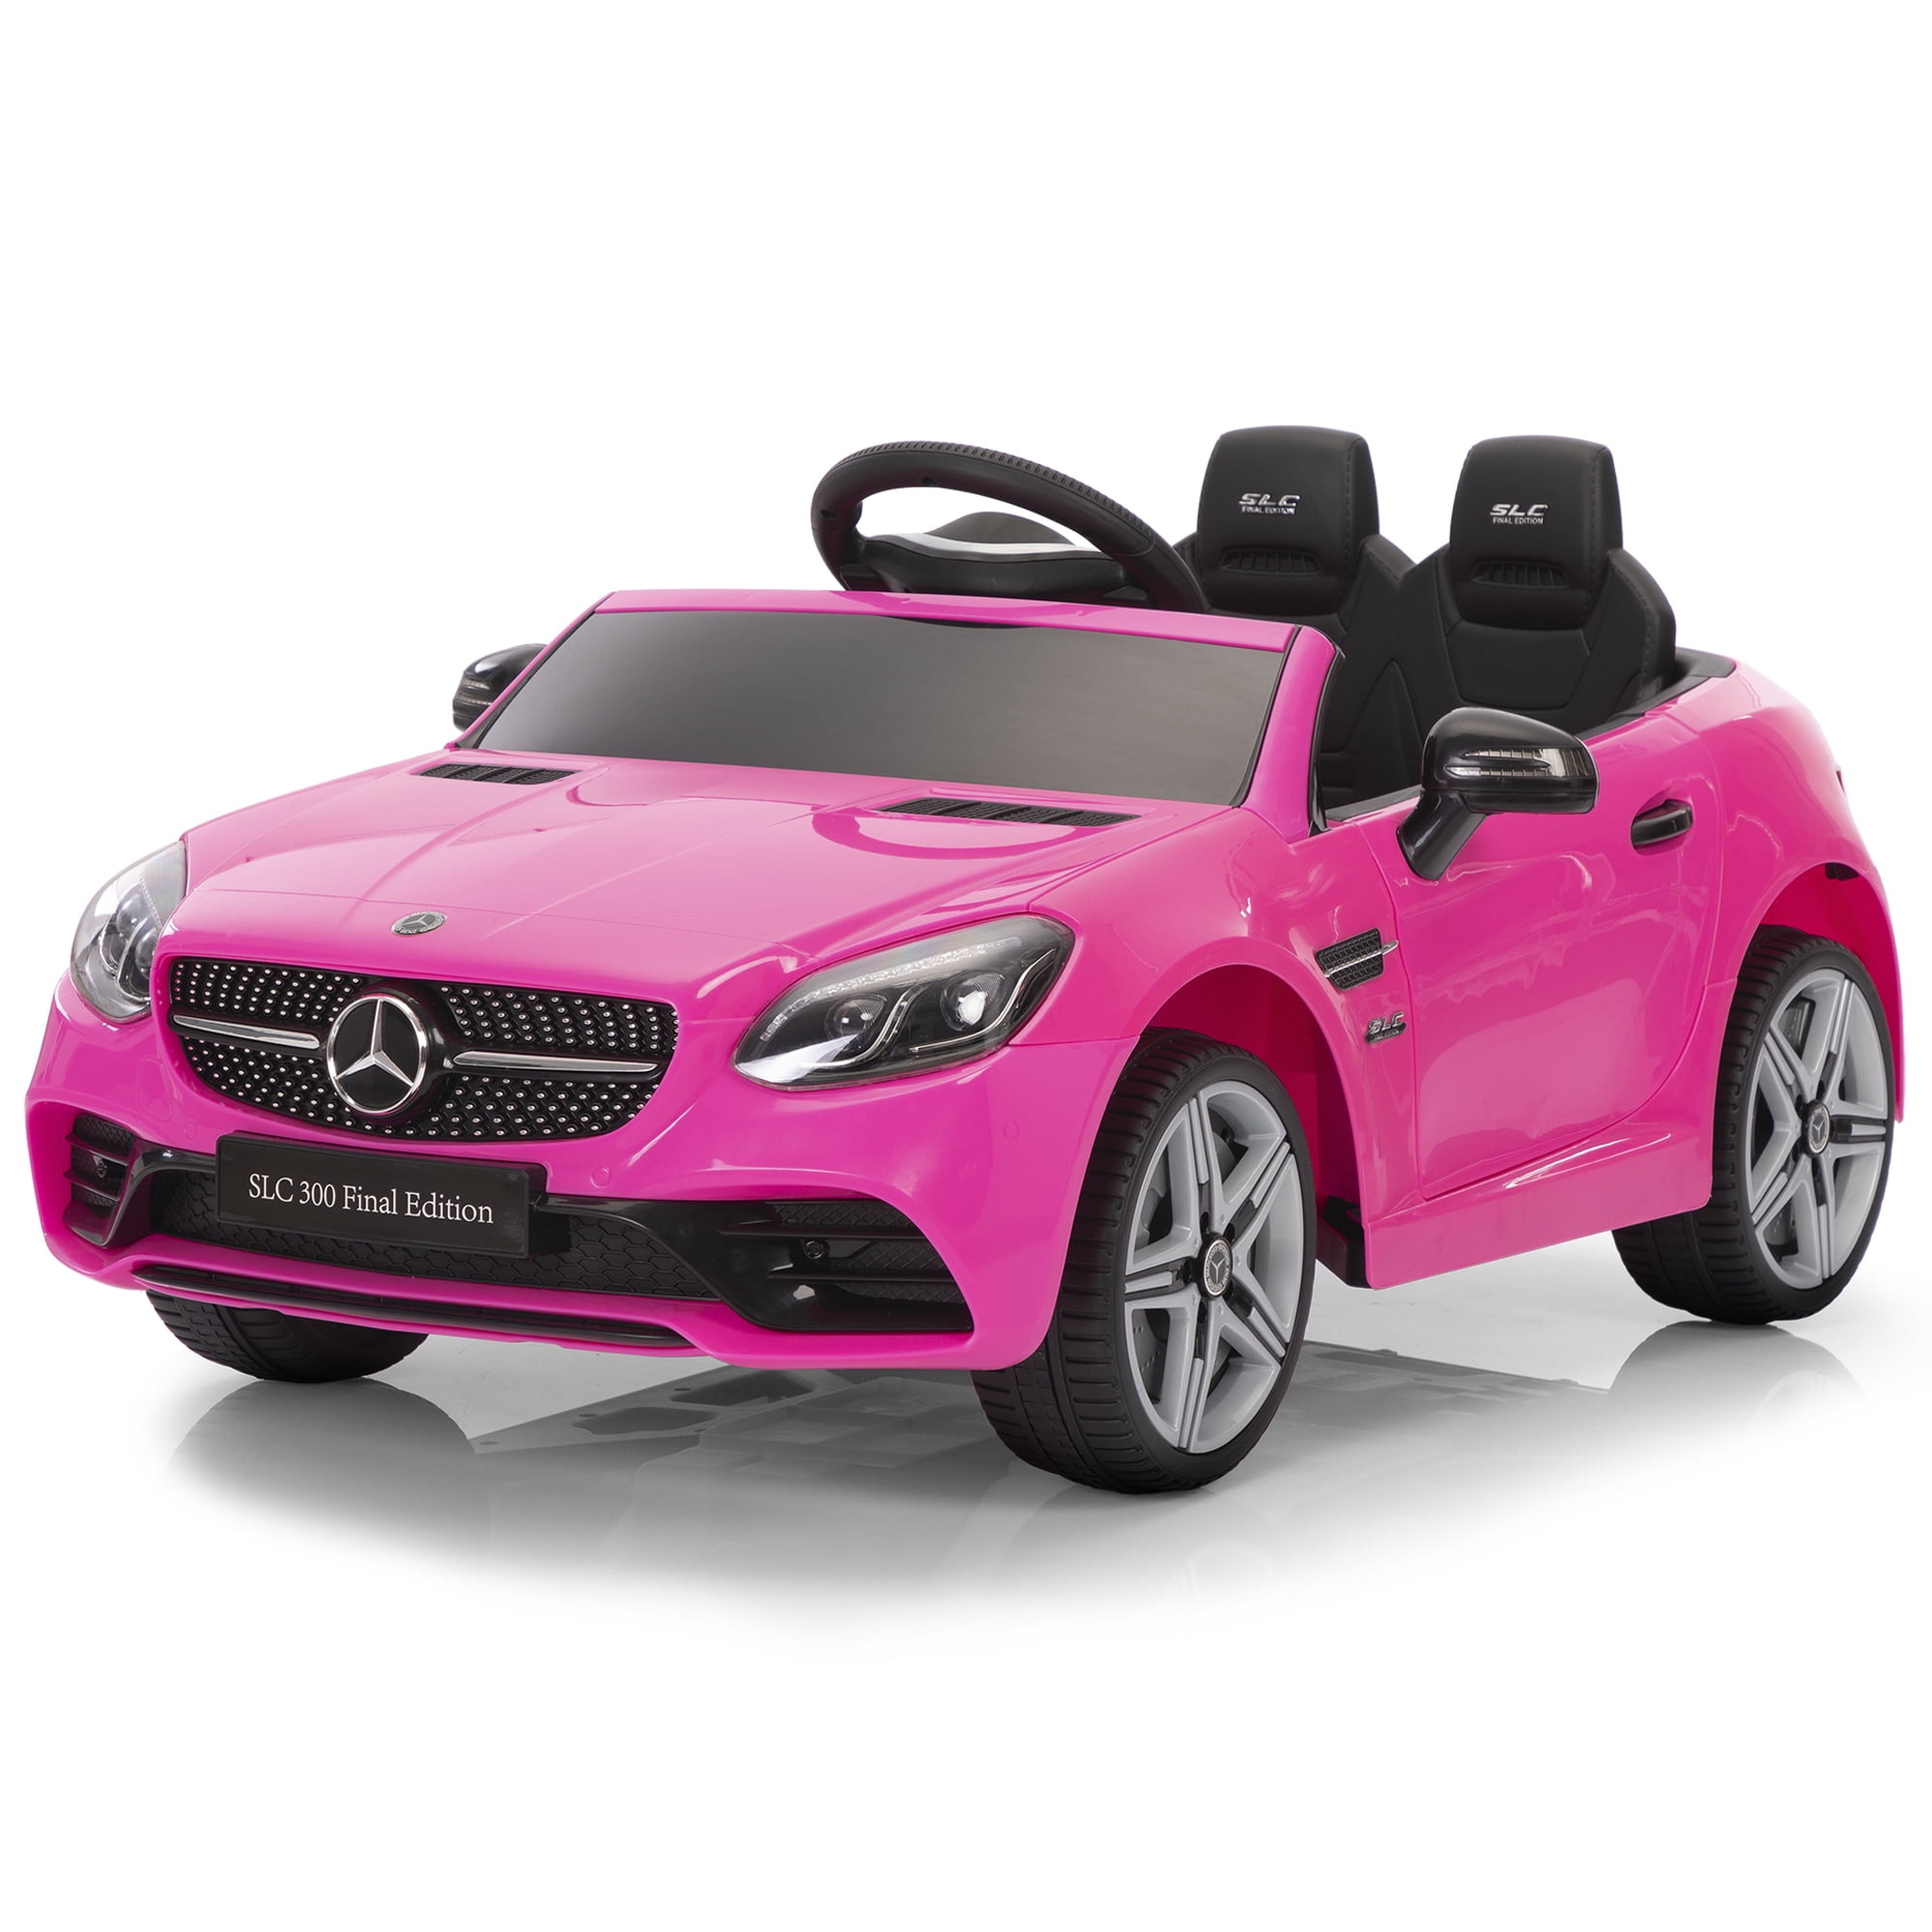 Kids Convertible Car Disney Frozen 6v Battery Powered Ride on Toy Wheels Power for sale online 